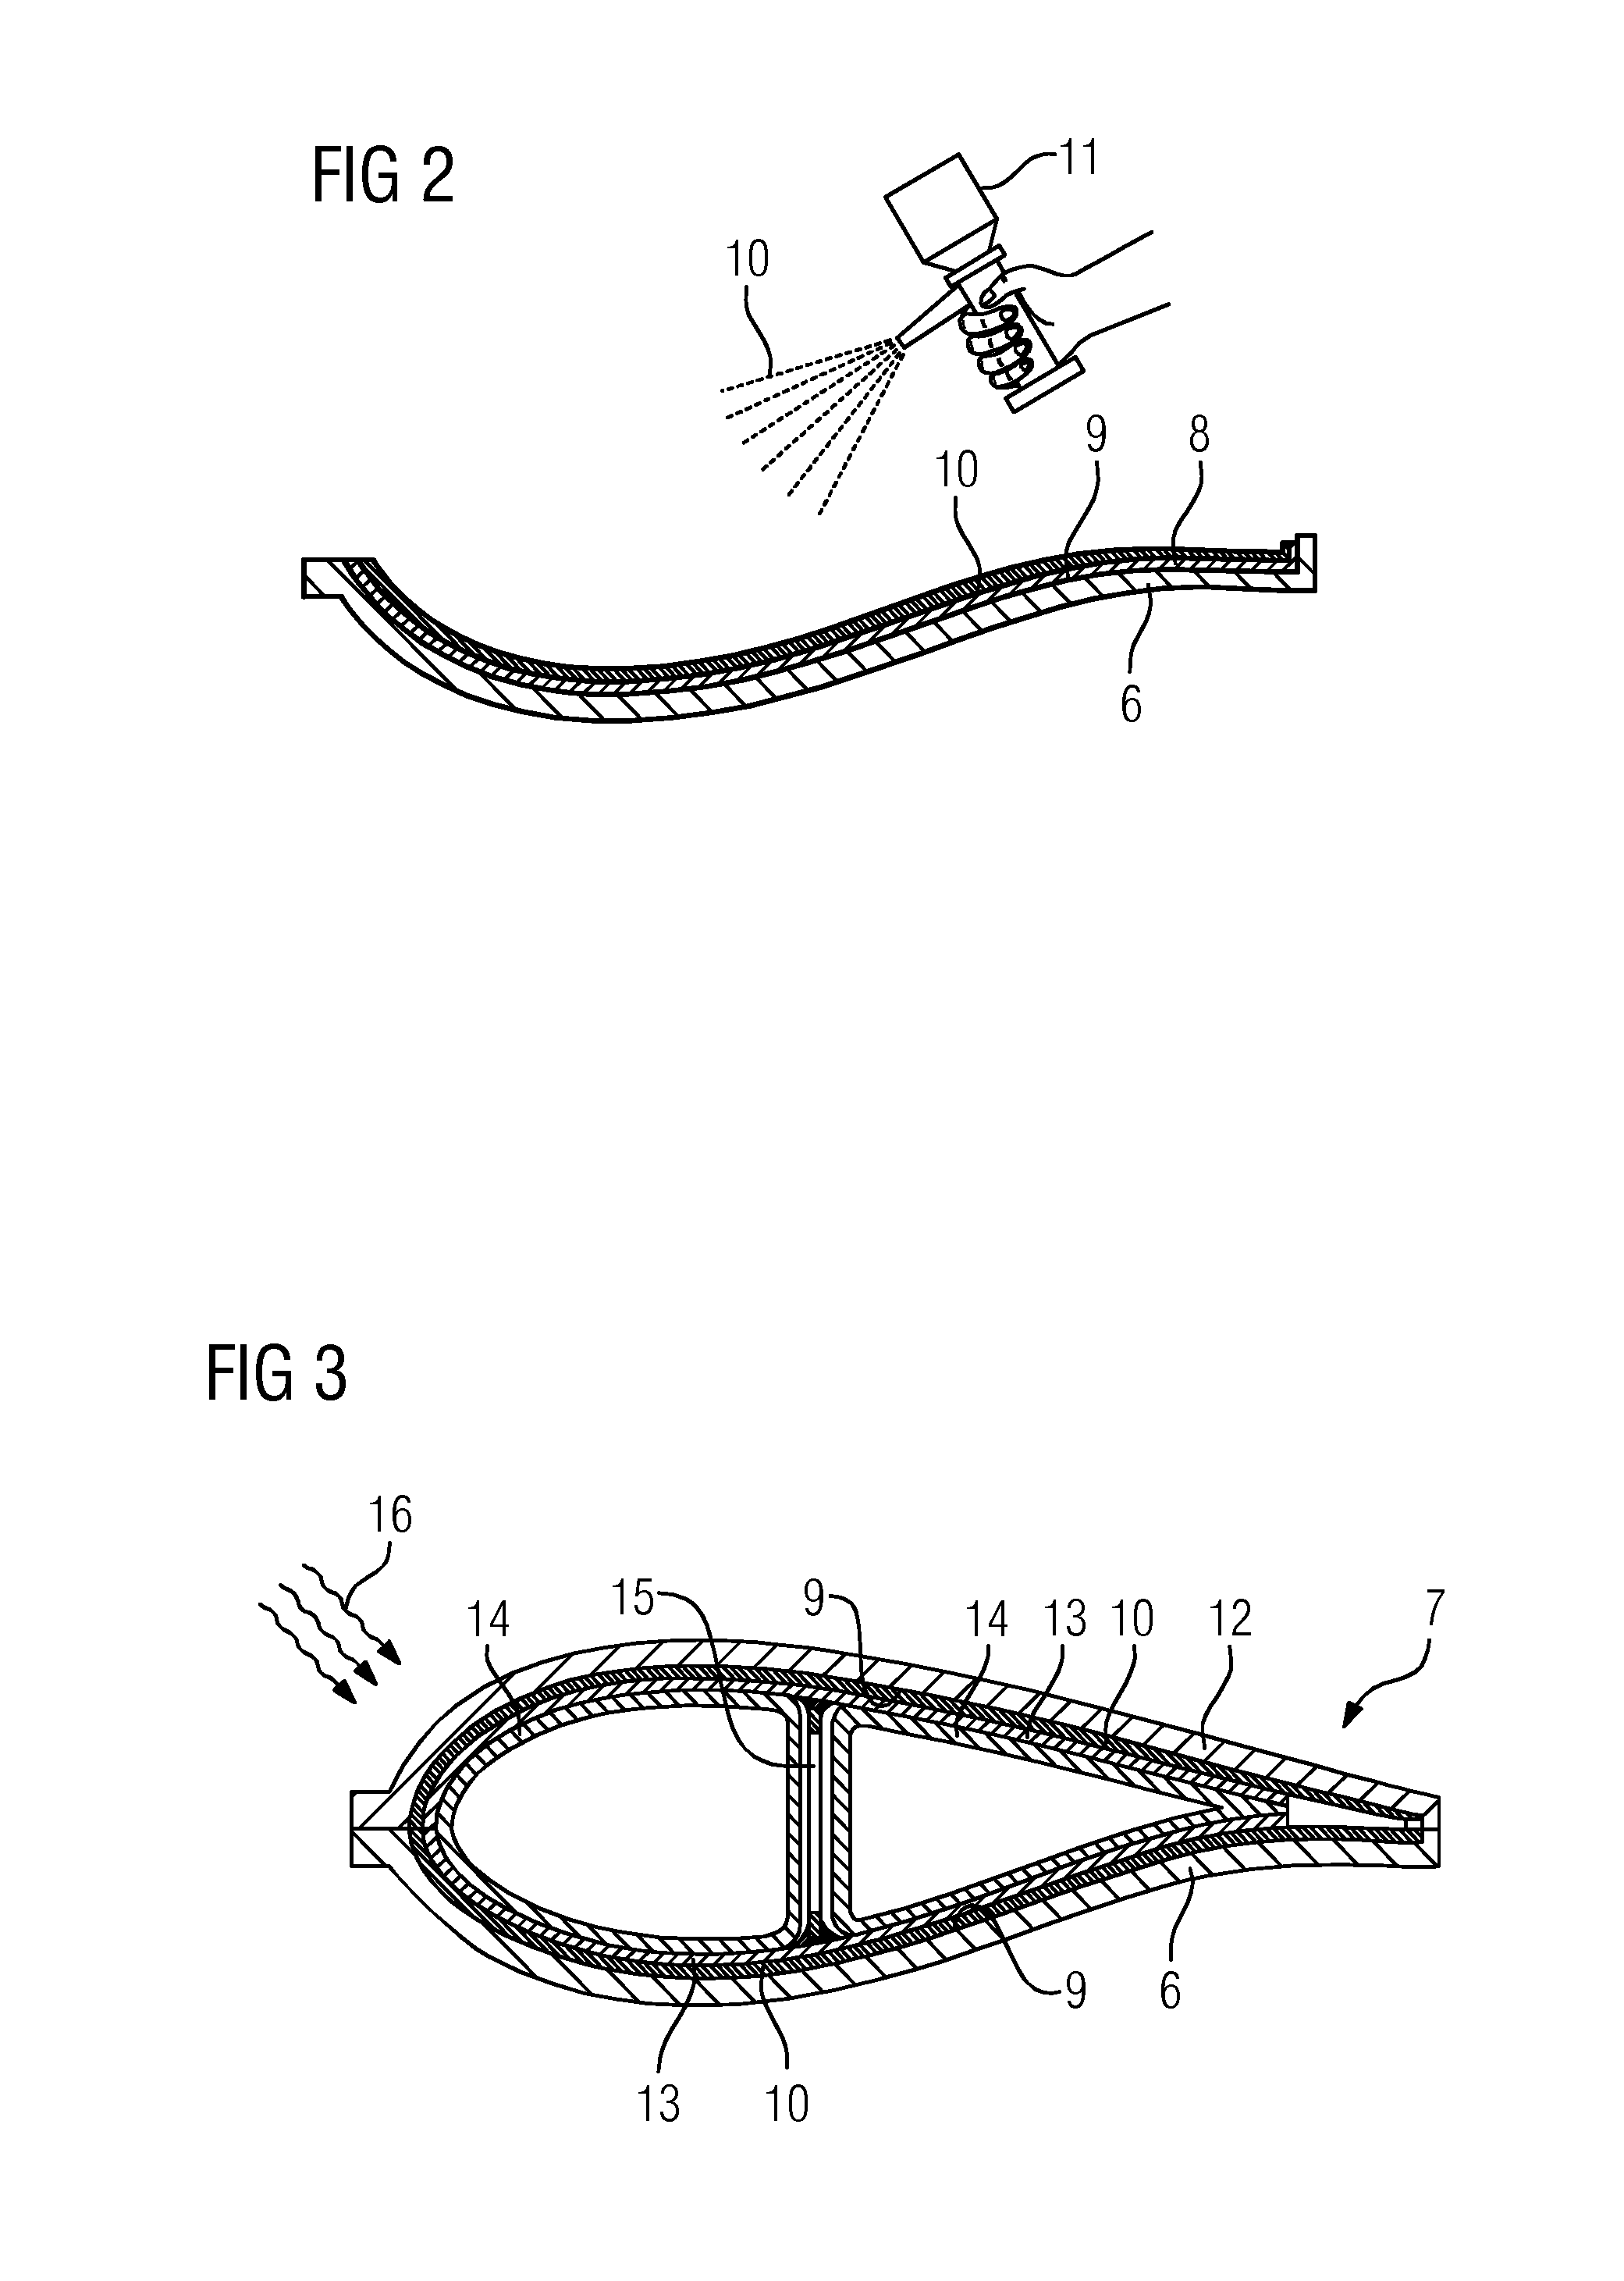 Method for manufacturing a component for a wind turbine